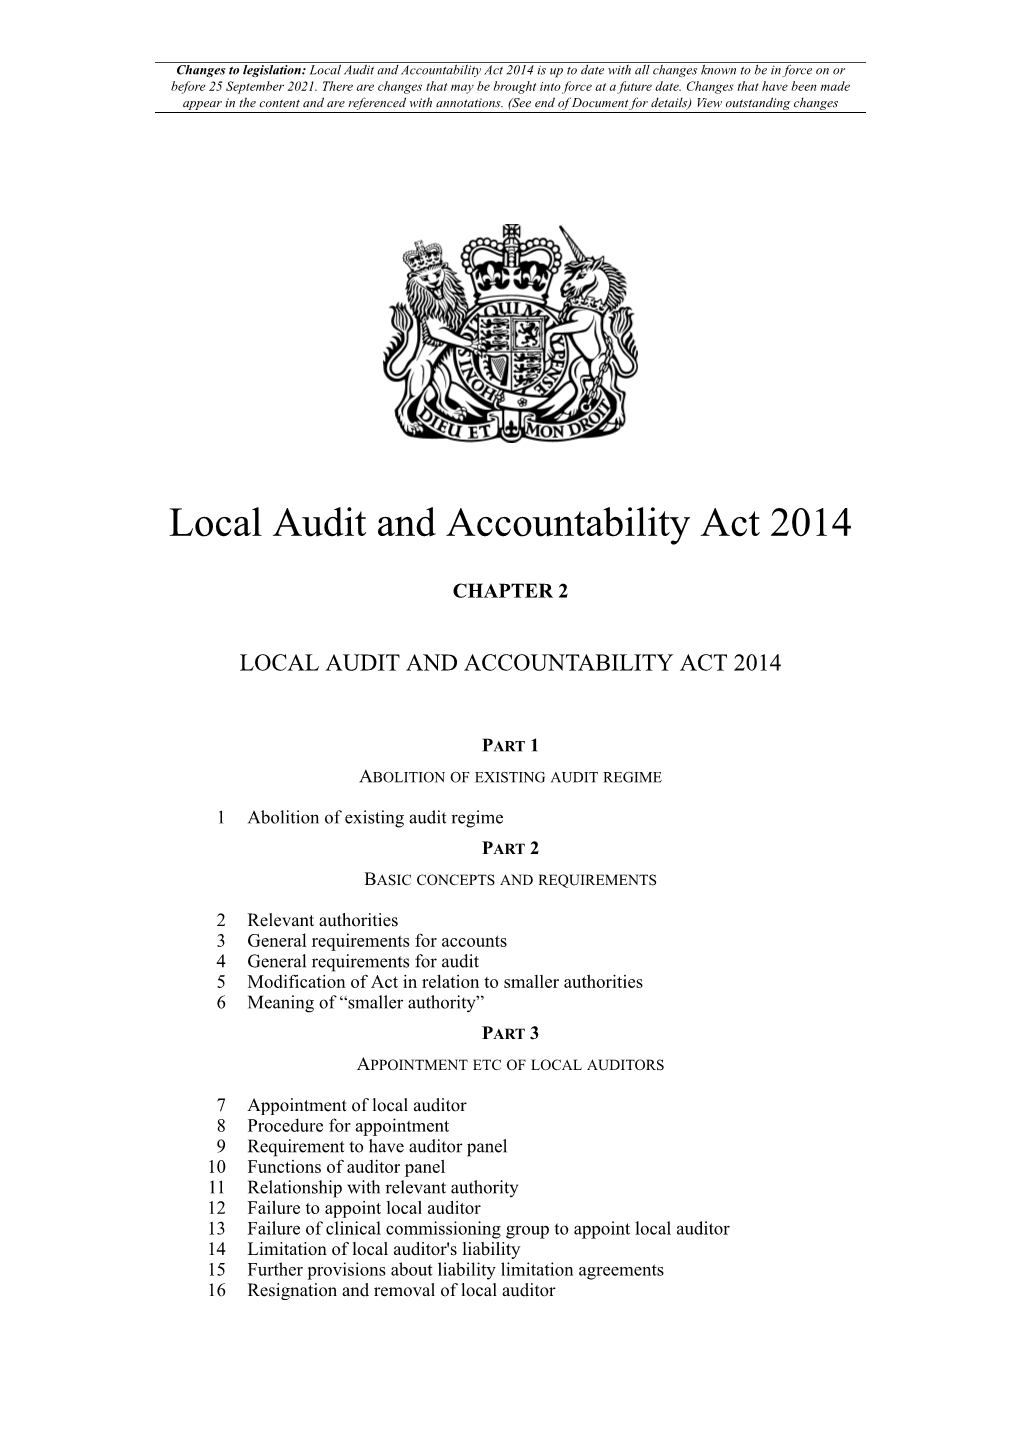 Local Audit and Accountability Act 2014 Is up to Date with All Changes Known to Be in Force on Or Before 25 September 2021